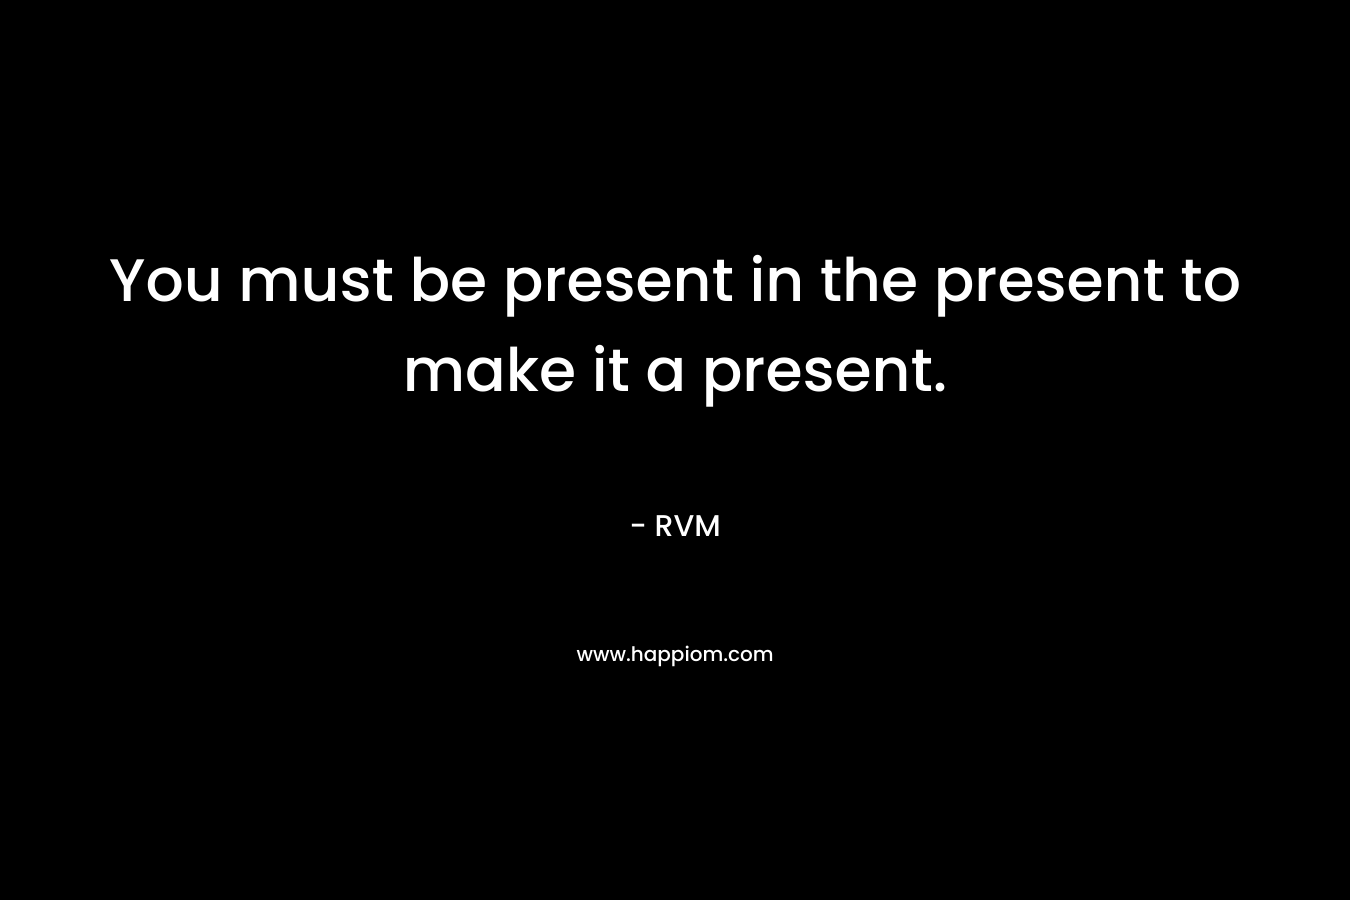 You must be present in the present to make it a present.